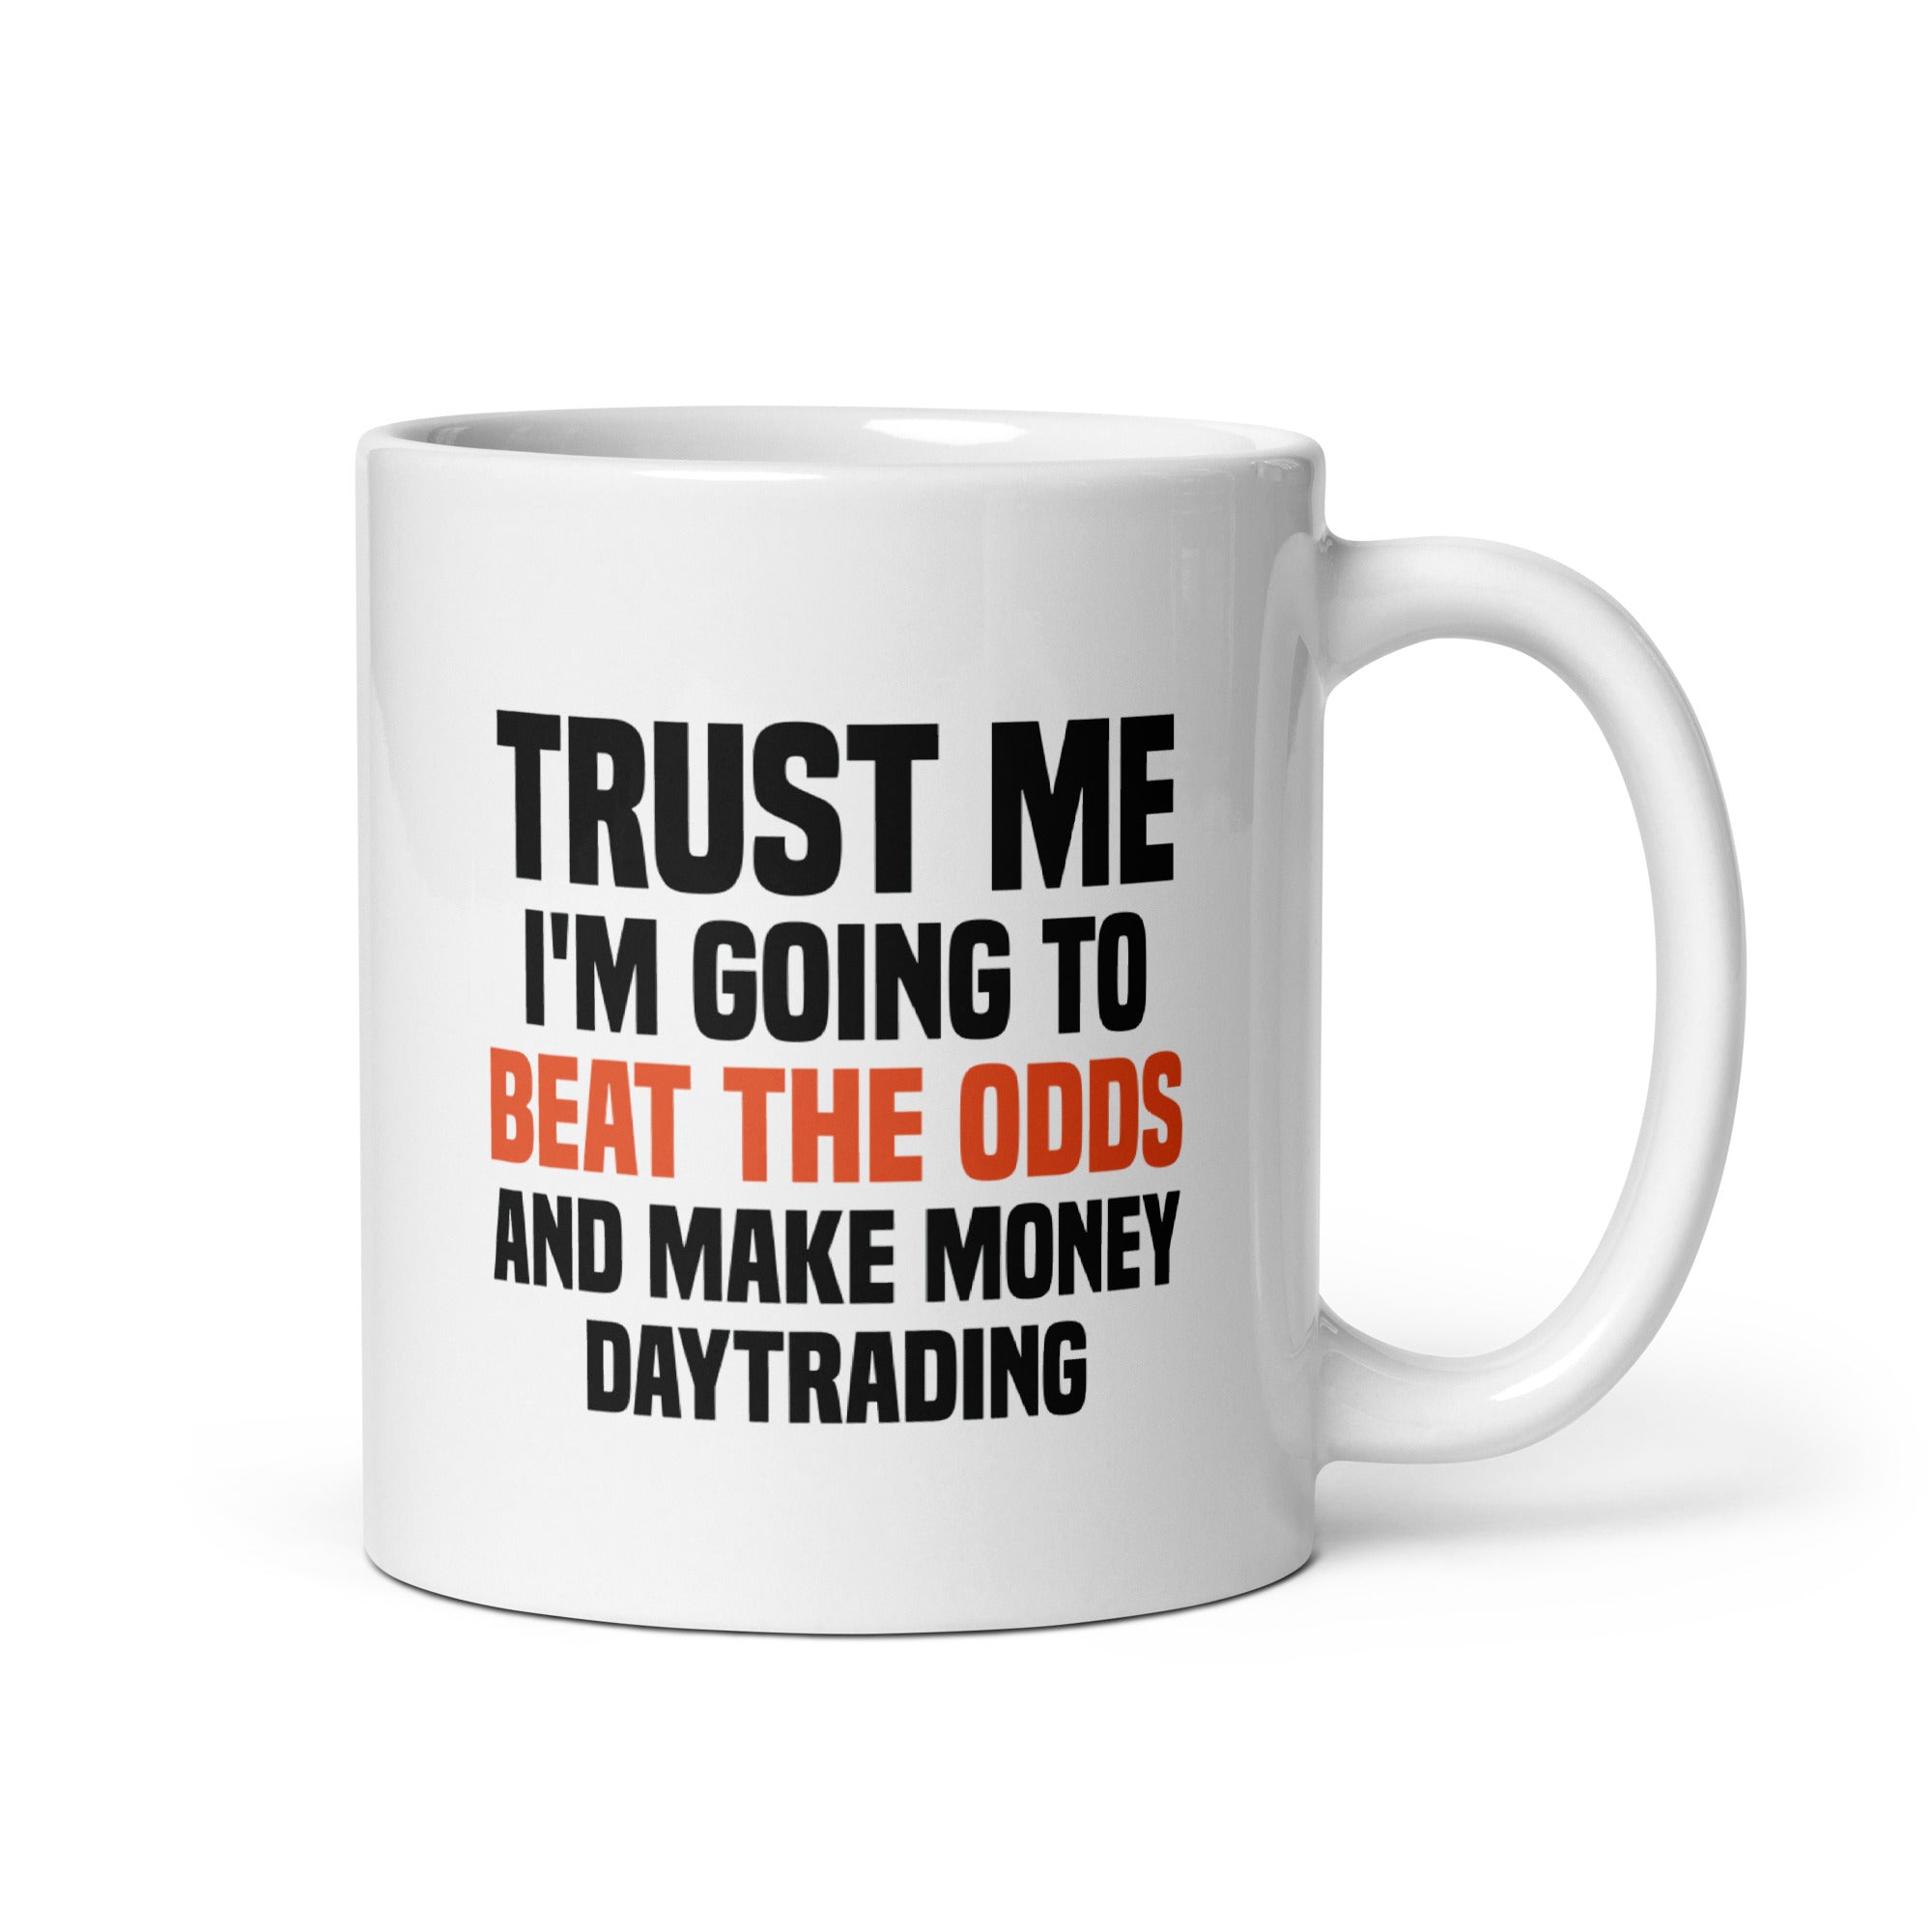 White glossy mug | Trust me I am going to beat the odds and make money daytrading